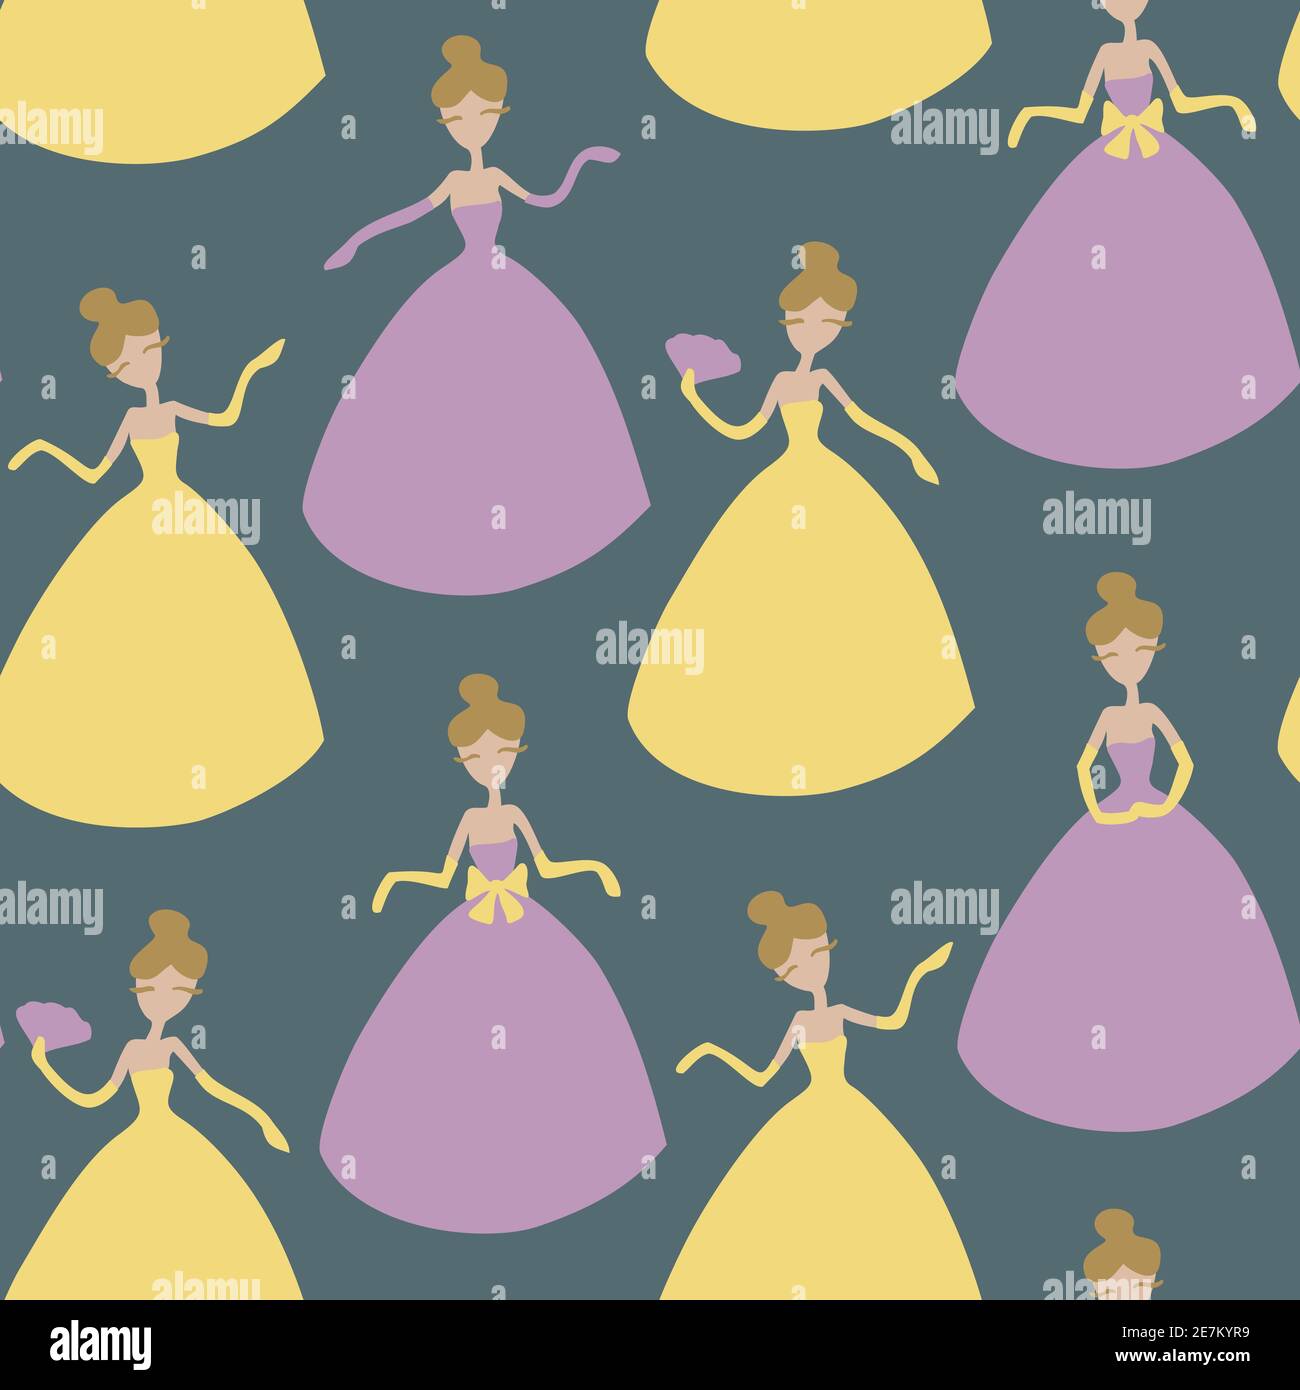 Vector seamless pattern with ladies cartoon characters. Ladies in colorful yellow and purple dresses and gloves in different poses. Woman with a fan a Stock Vector